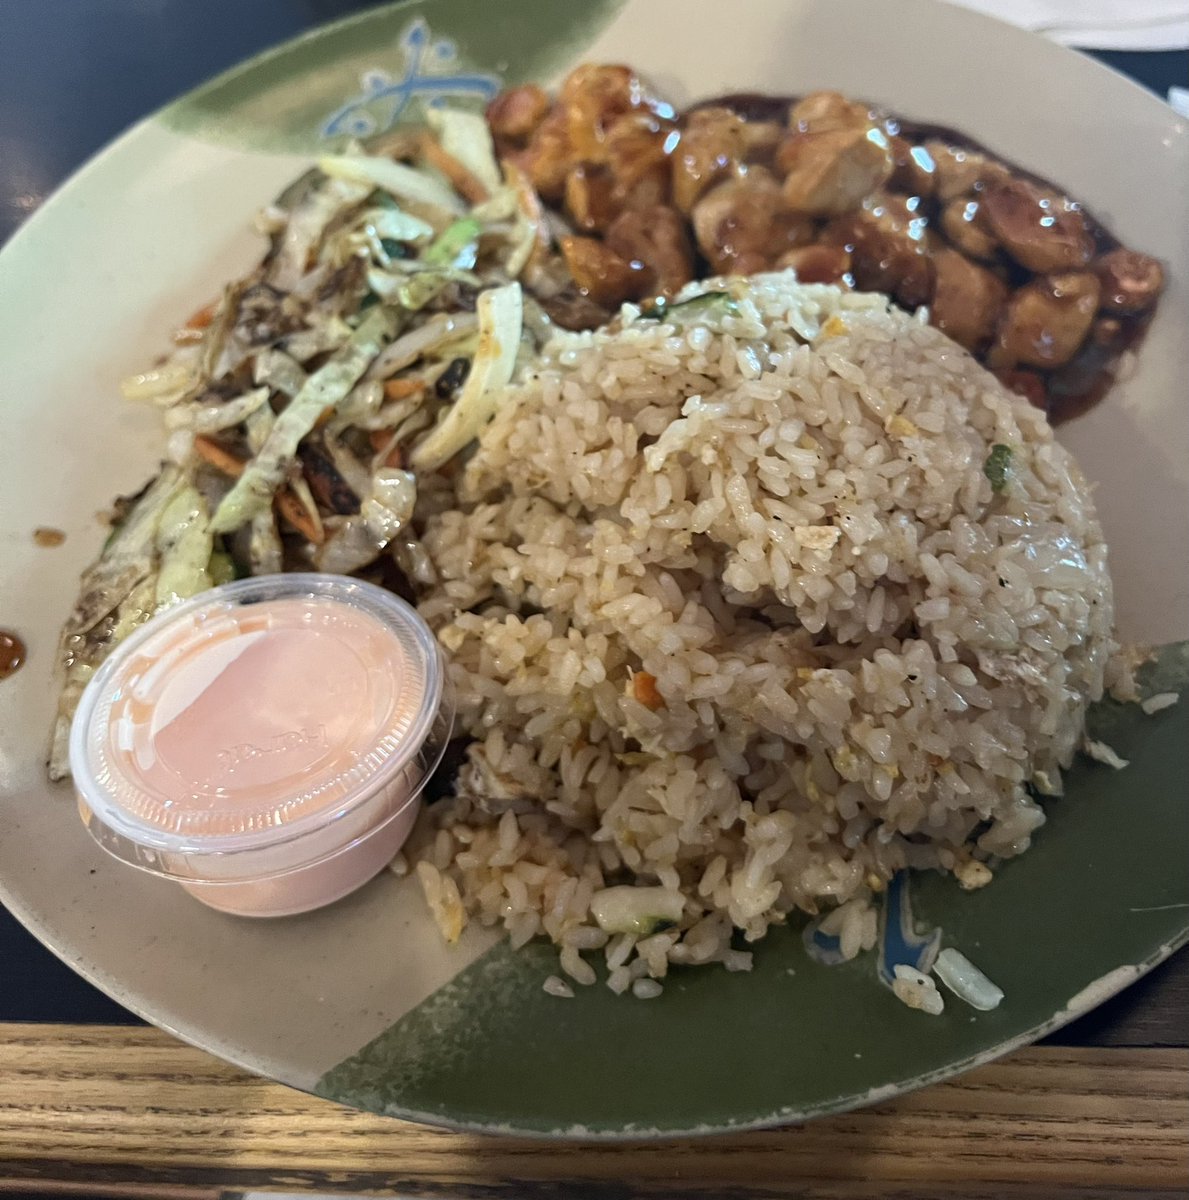 I feel so special I was just treated to #Hibachi for lunch 😋🥢🍚🔥🔥🔥 #Kampai #Stonecrest #AtlantaEats 😋🫶🏾🤎